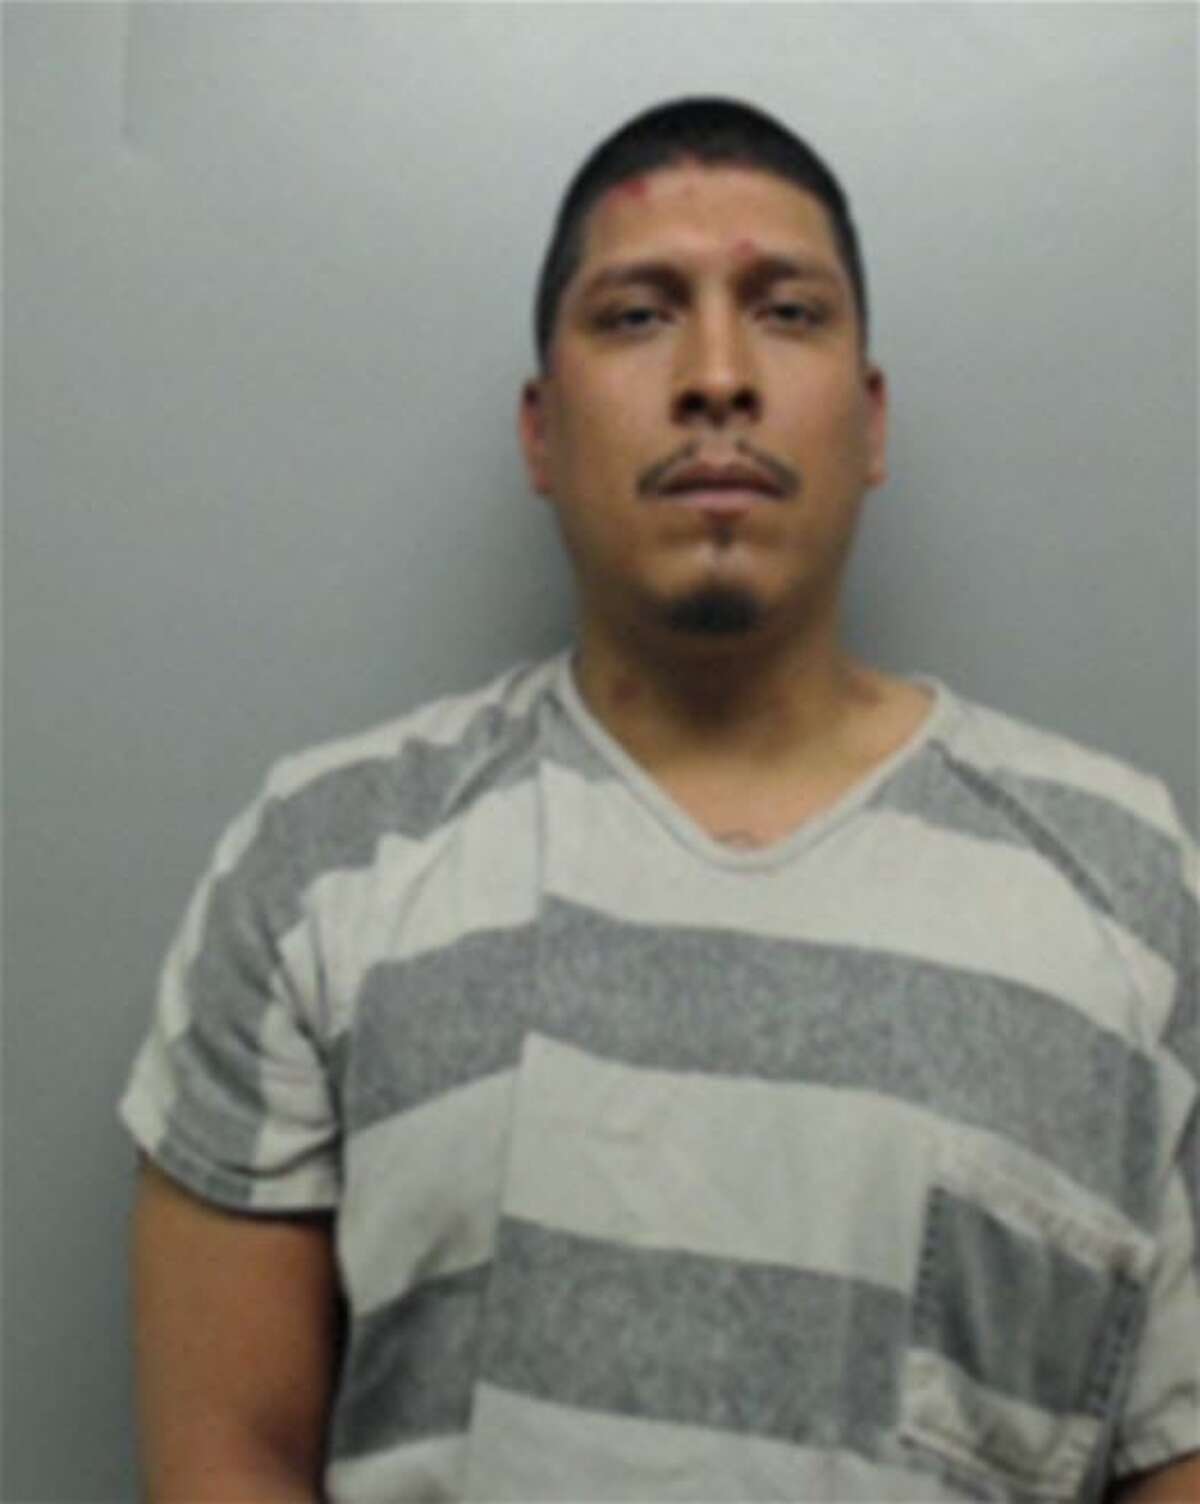 Hector Sada, 32, was charged with aggravated assault with a firearm, assault on a public servant, resisting arrest and unlawful carrying of a weapon.